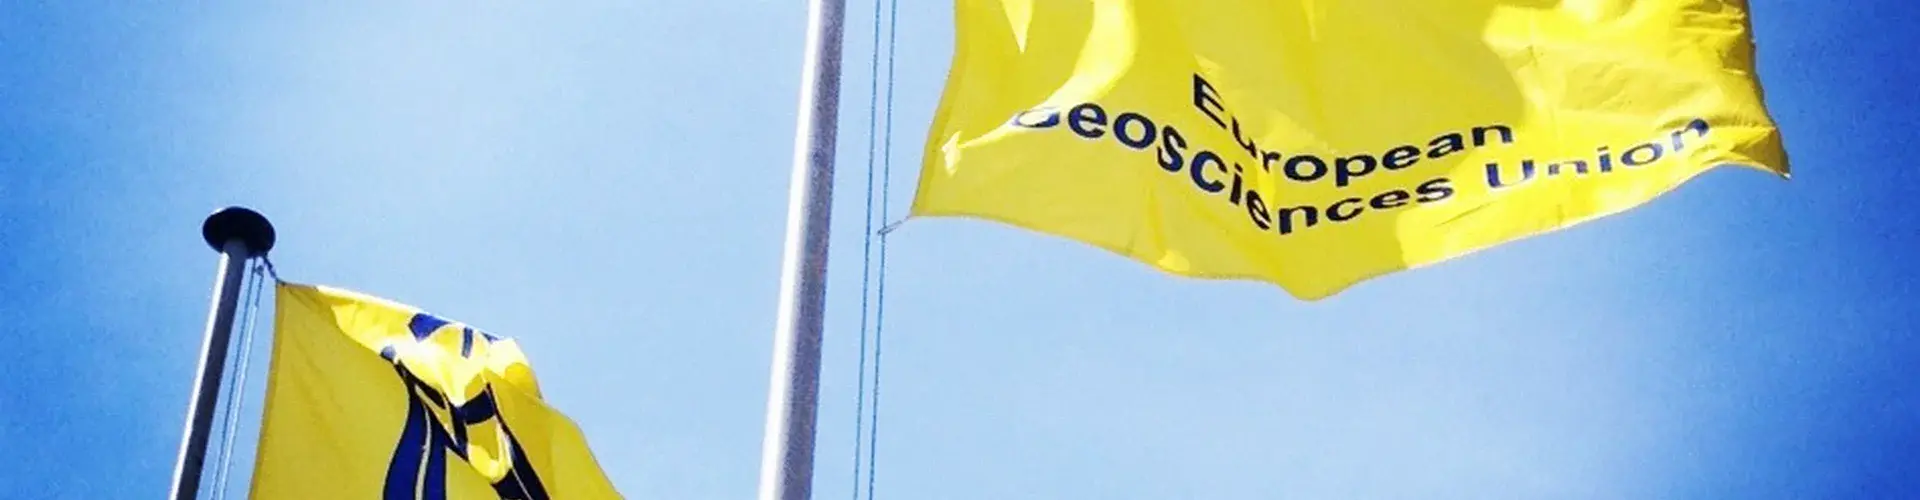 EGU flags at the 2012 General Assembly